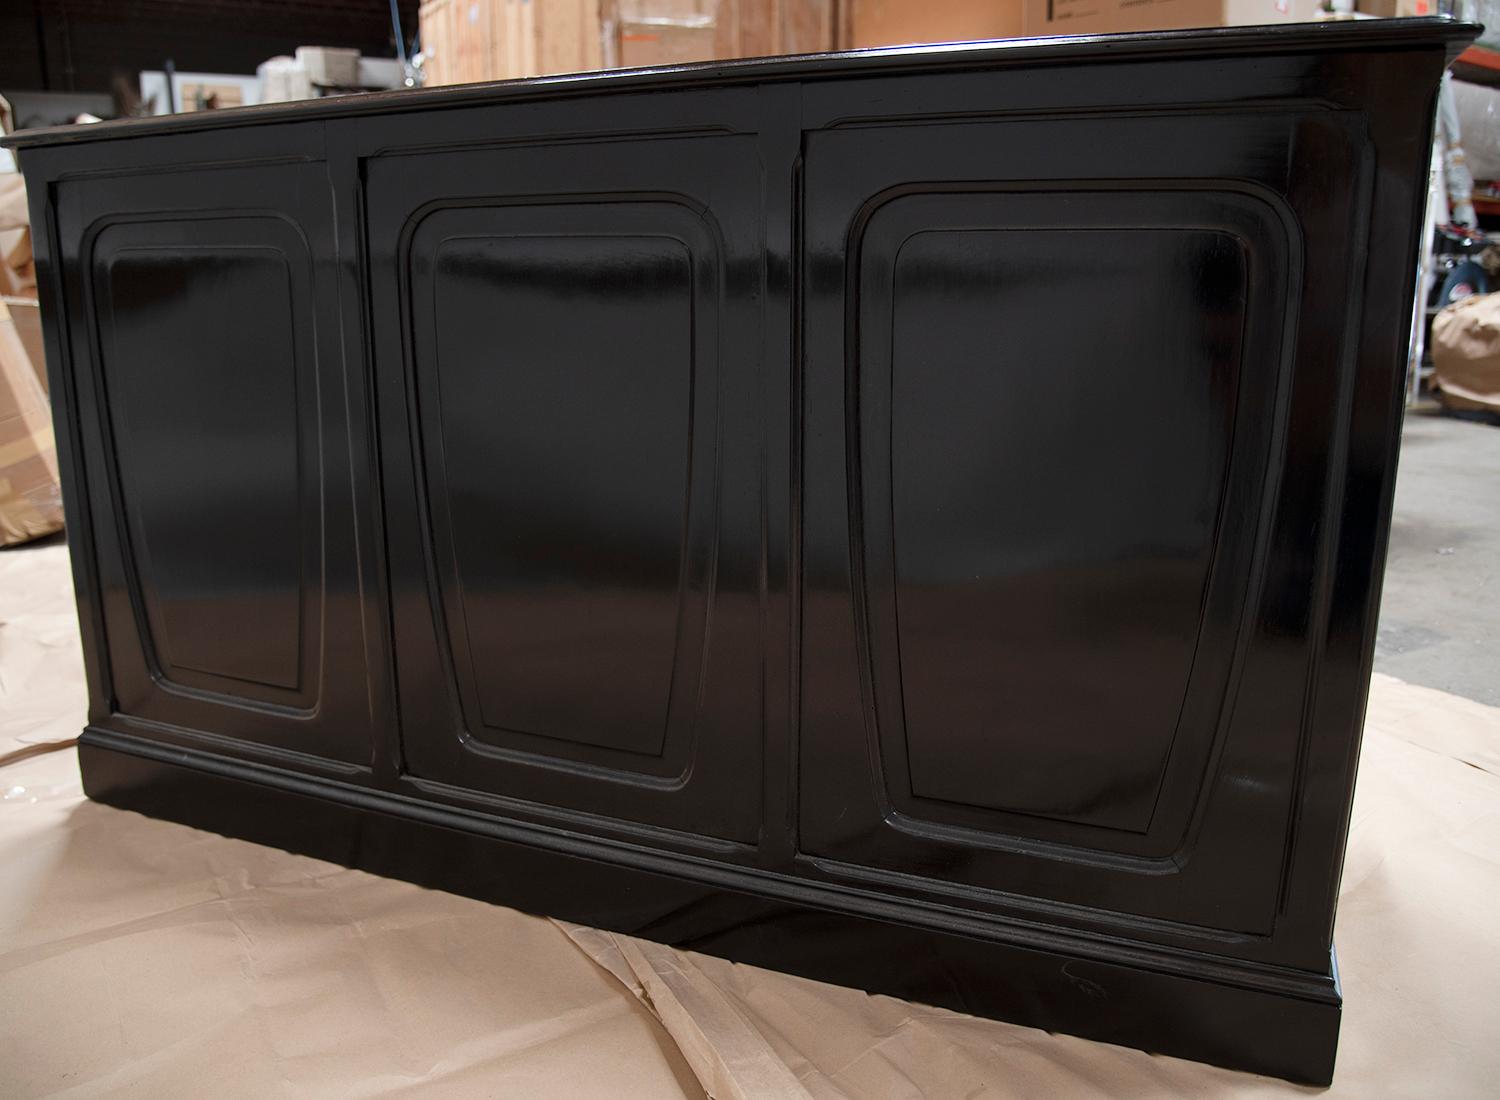 Made in France, 20th century. Artist or manufacturer unknown. A glossy finish makes this a standout cabinetry piece as a buffet or bedroom furniture addition, or even a bar add-on.